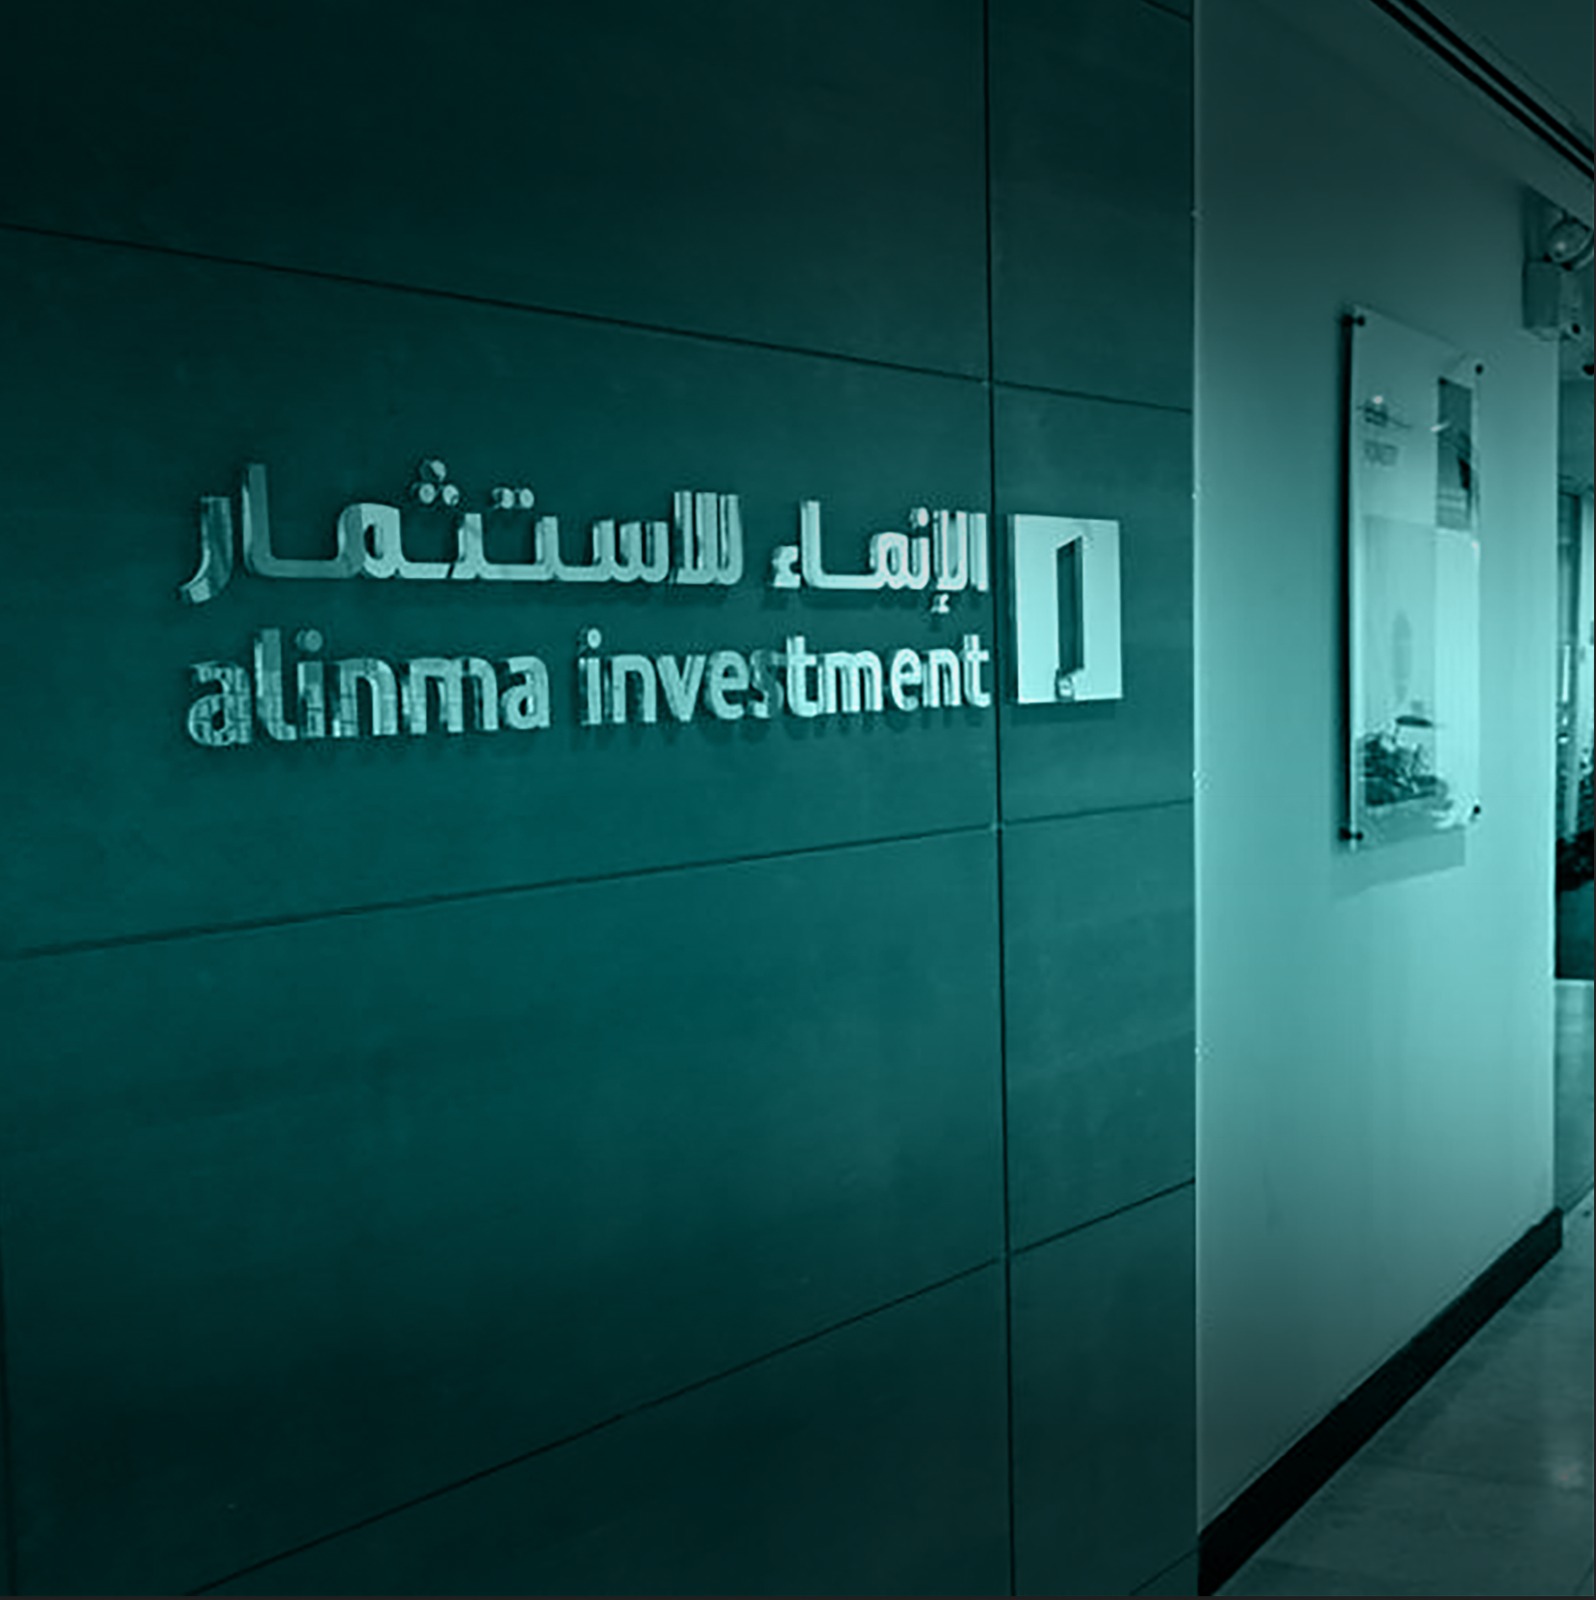 regarding the incorrect valuation of a unit of Alinma Saudi Government Sukuk ETF Fund